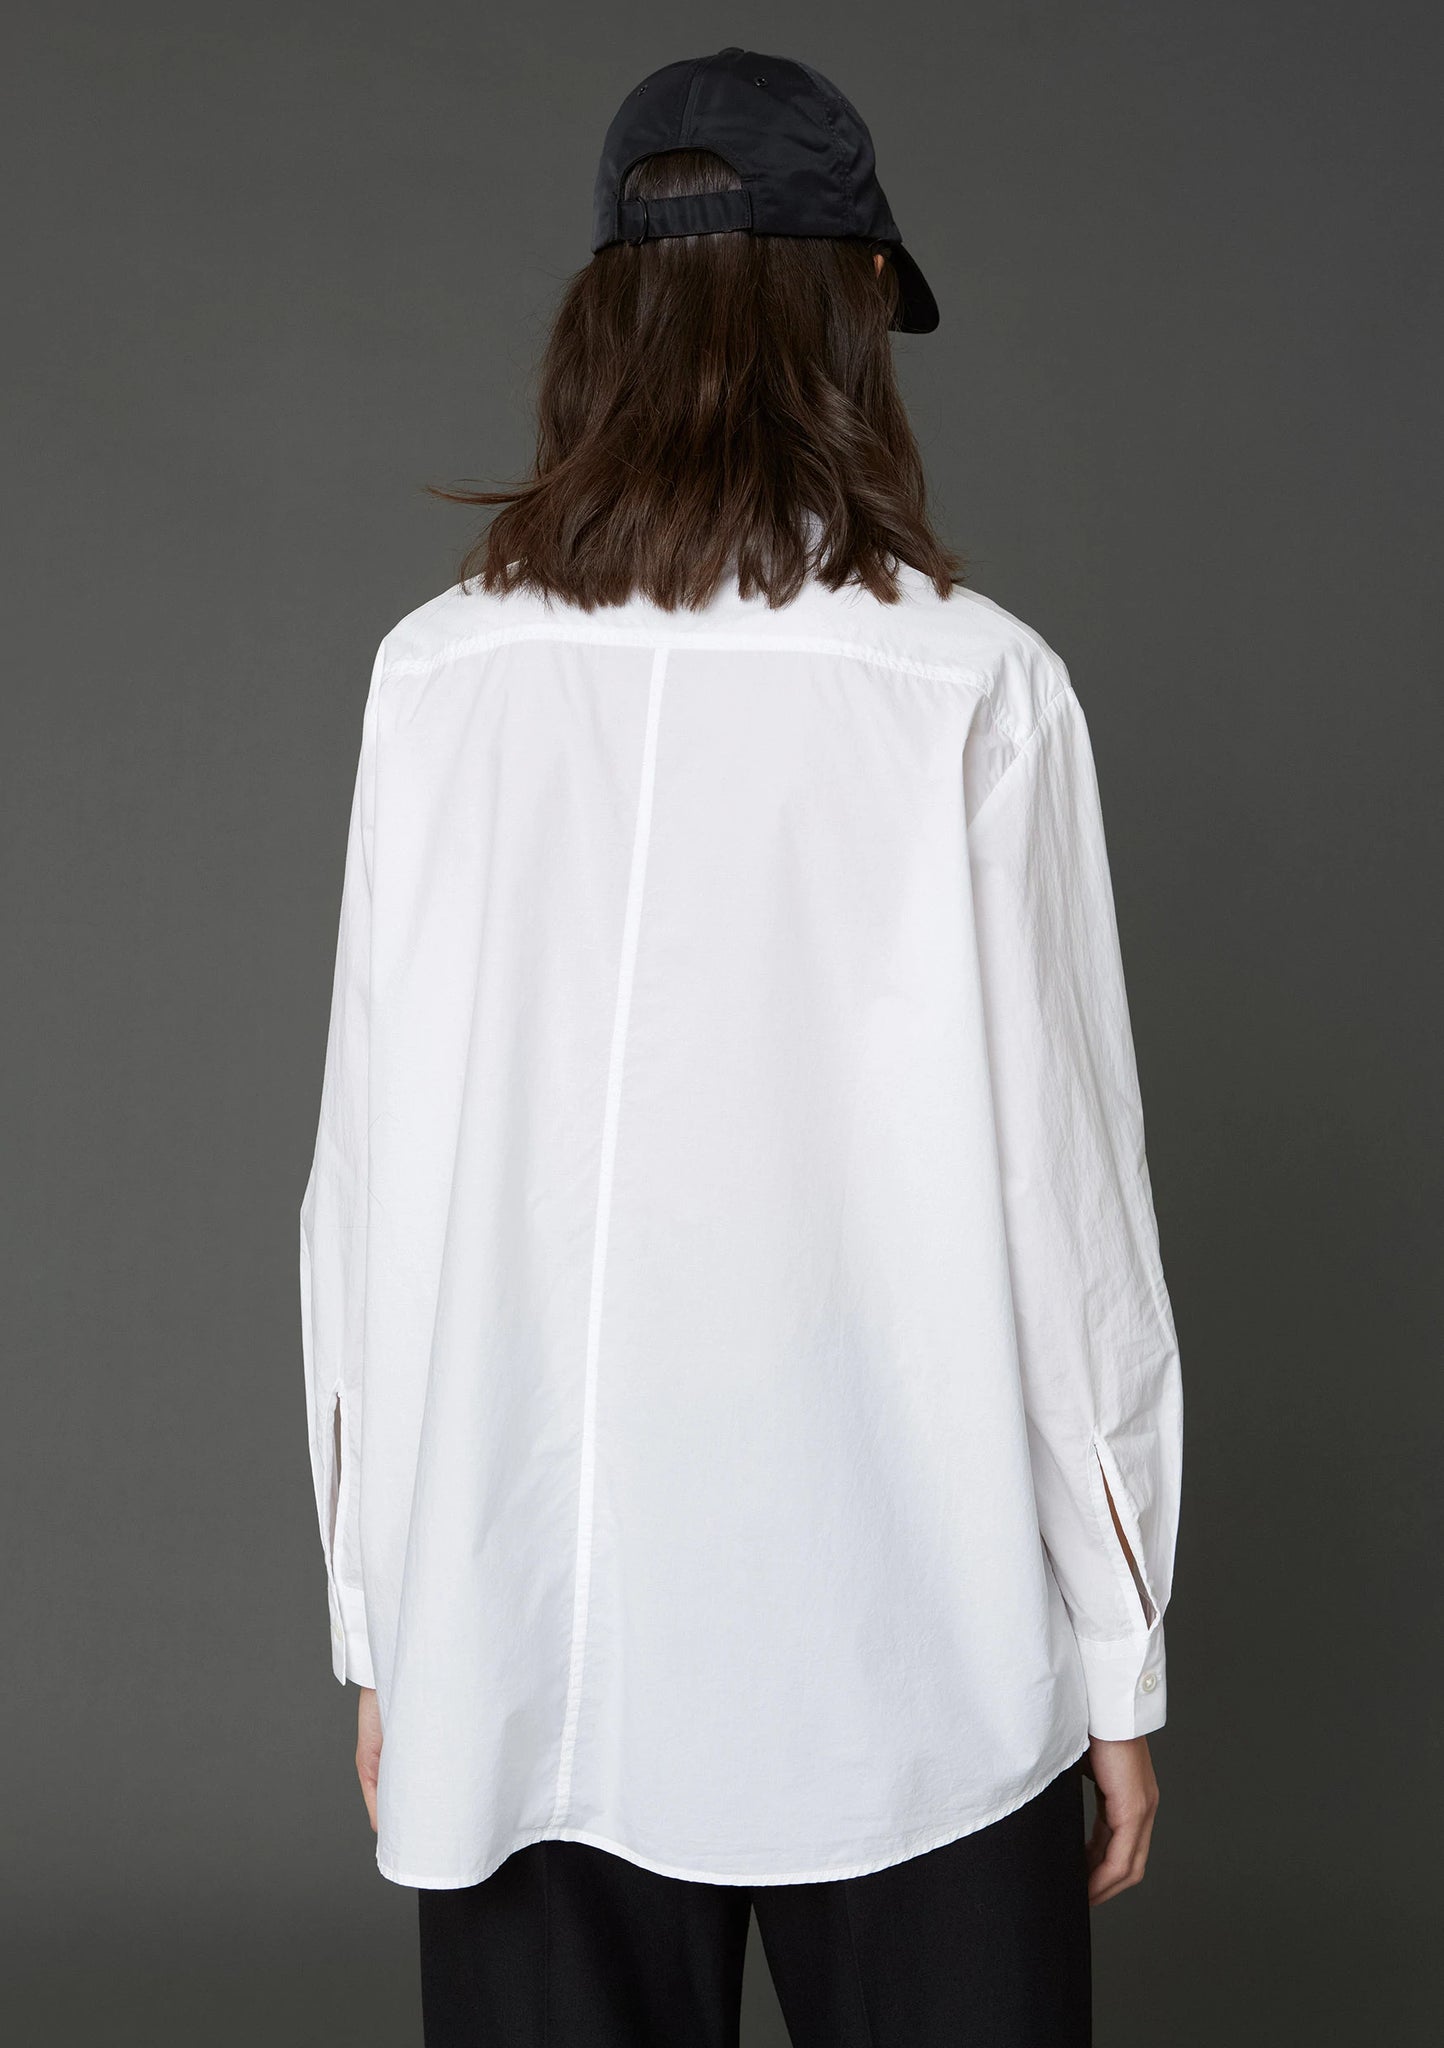 ELMA SHIRT IN WHITE BY HOPE